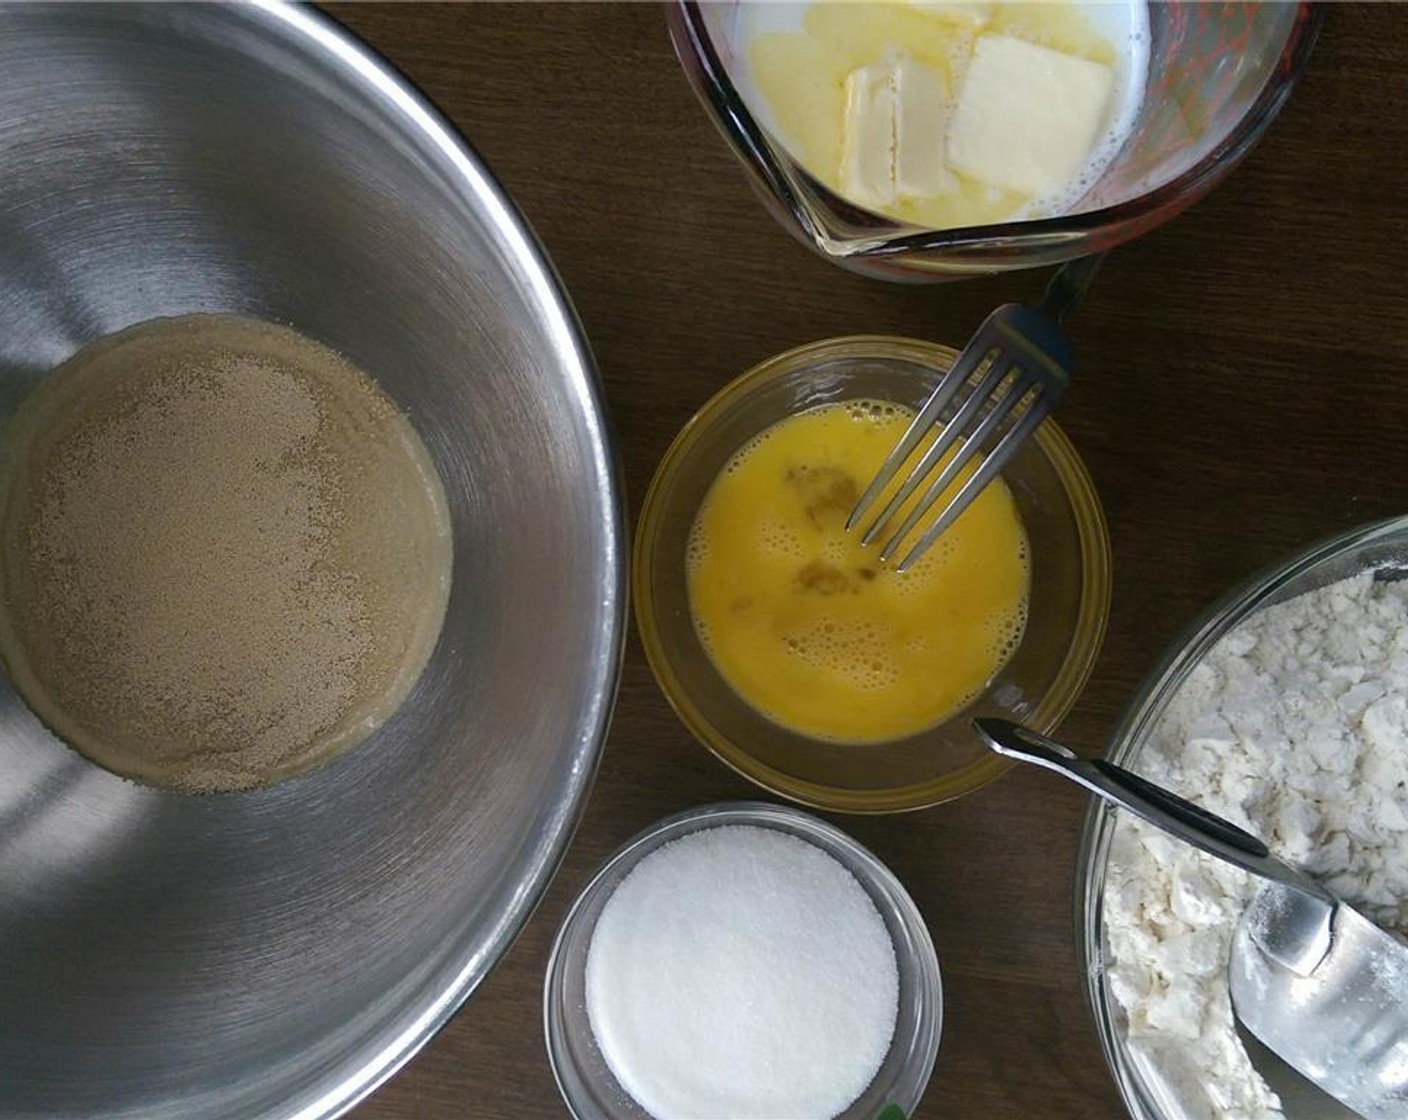 step 1 Dissolve Active Dry Yeast (1/2 Tbsp). Add Water (2 Tbsp), Milk (1/2 cup), Egg (1), 1/4 cup of the Granulated Sugar (1/2 cup), Unsalted Butter (3 Tbsp), Salt (3/4 tsp) and 1 1/4 cups of All-Purpose Flour (2 1/4 cups).